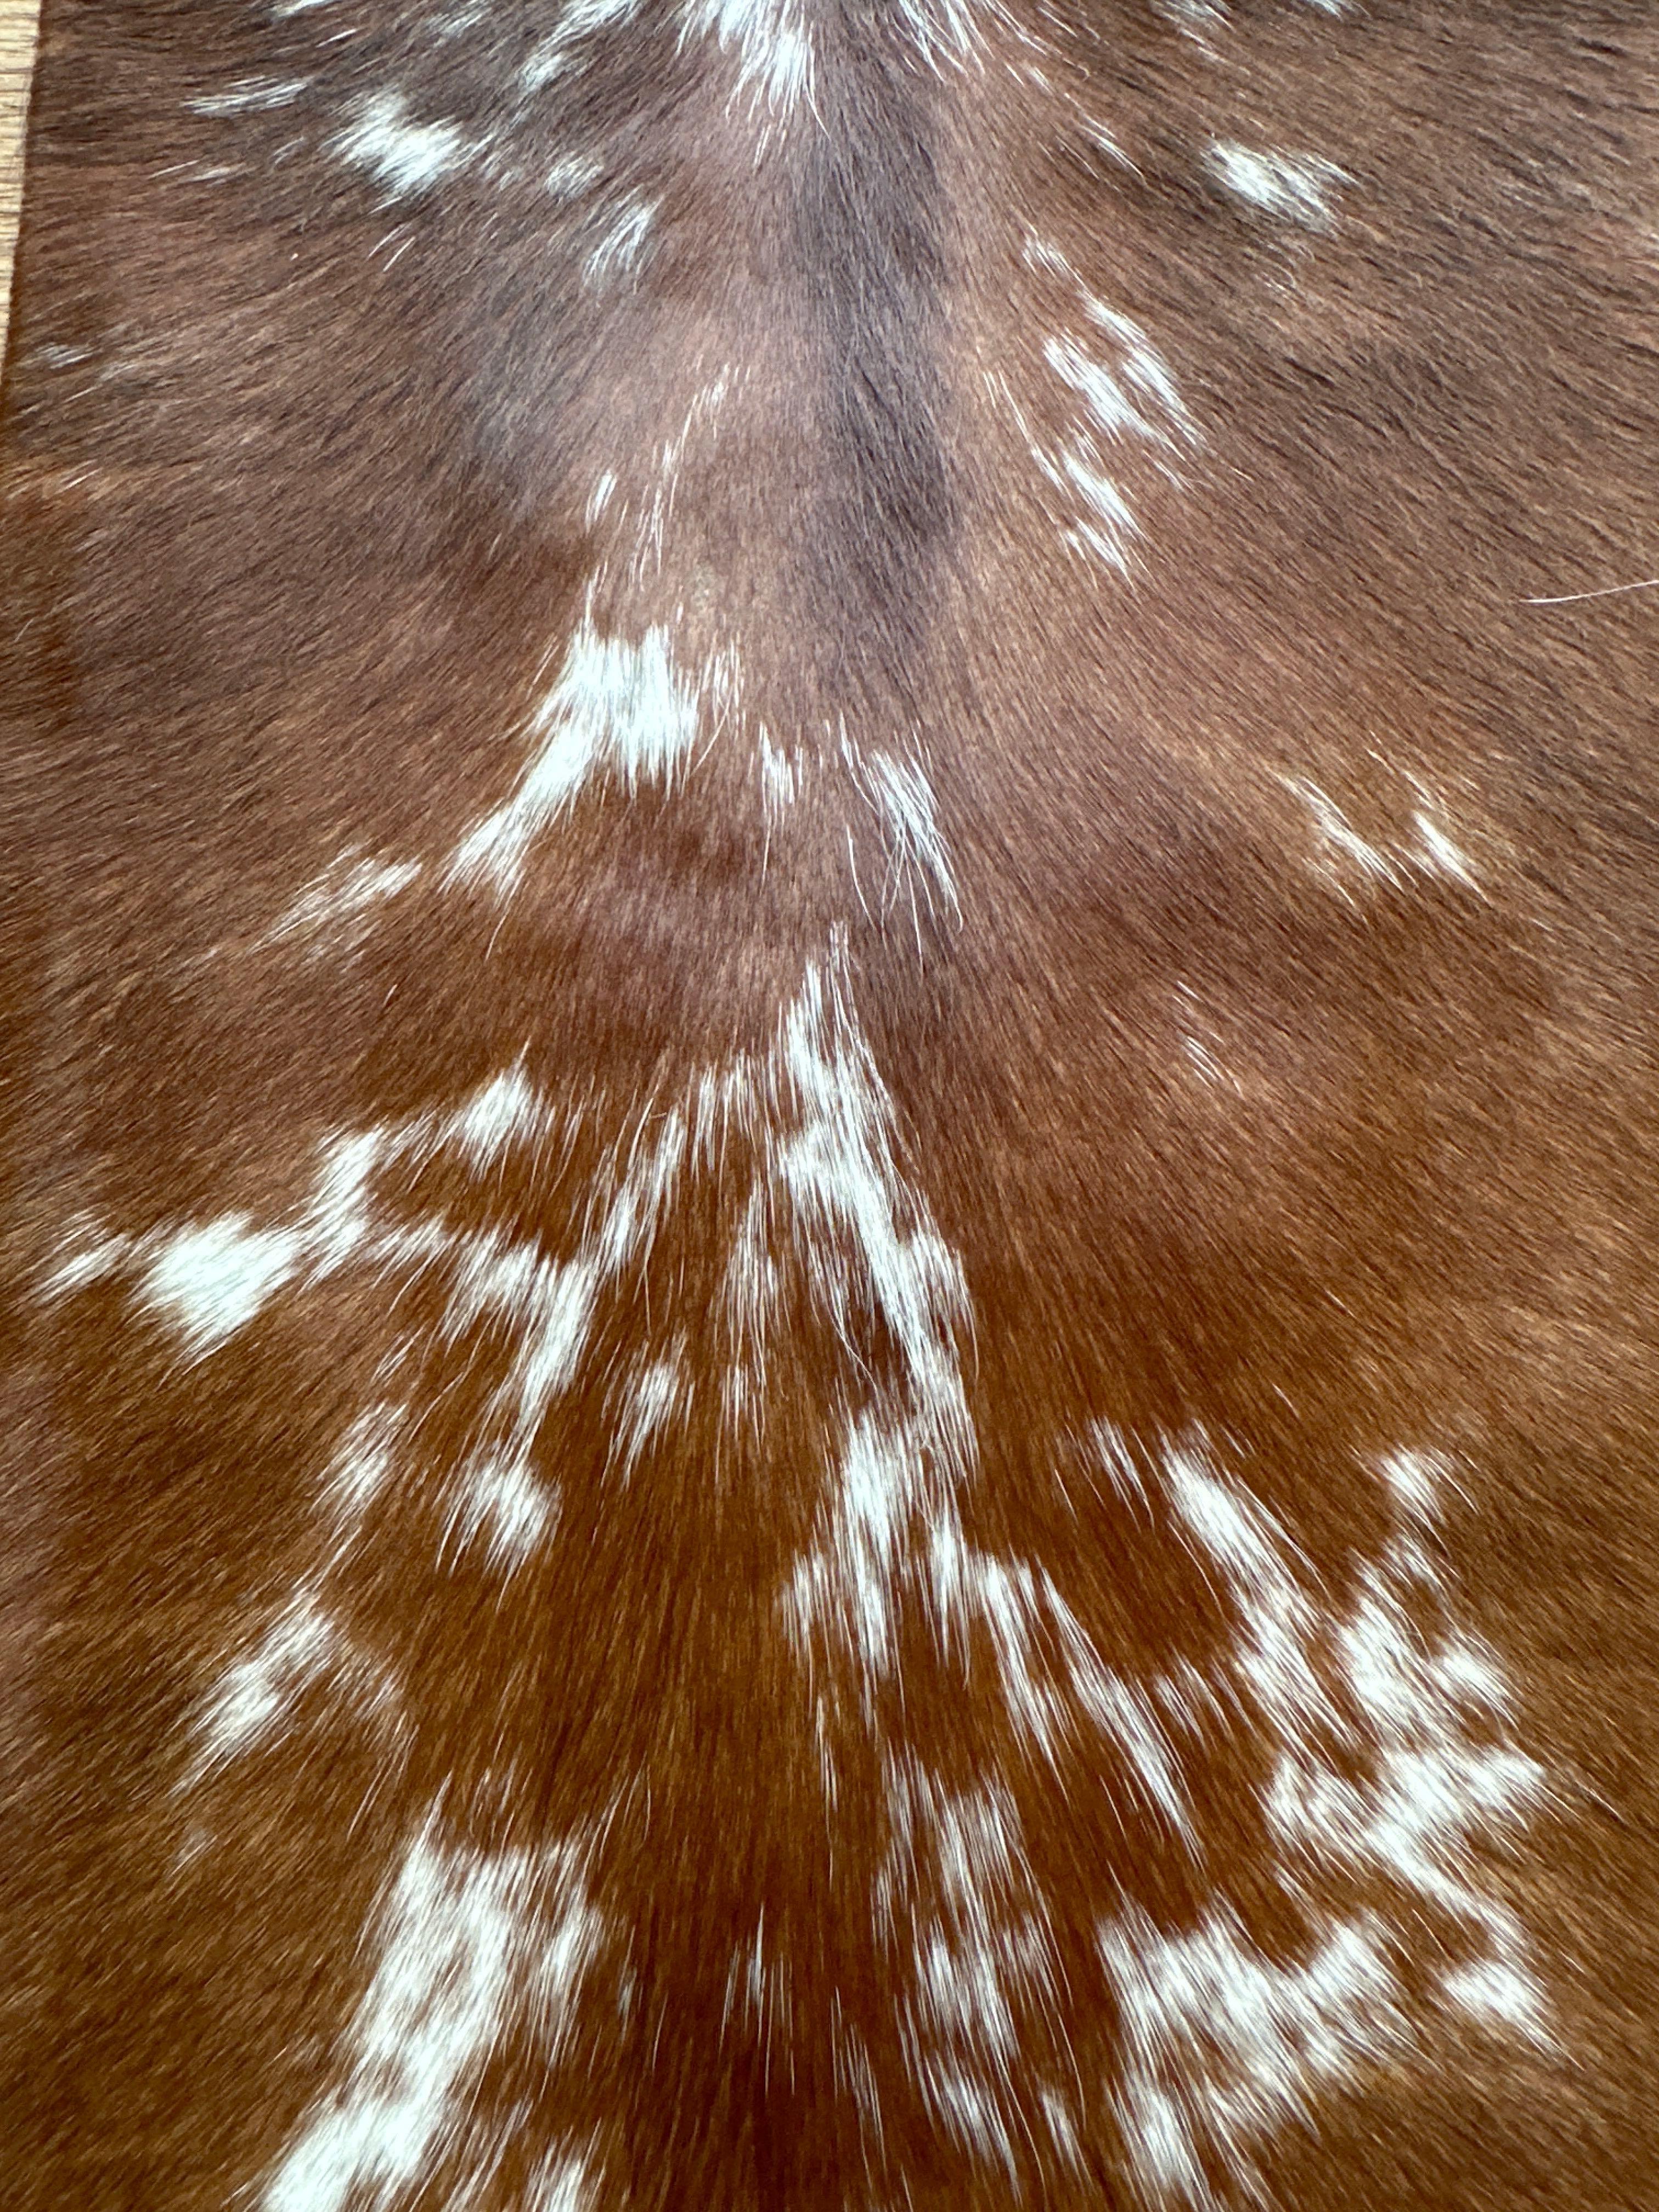 Cowhide Leather Cushion Cover 100% NaturalÂ Cowhide Leather Cushion Is Single-Sided And Rich In - Image 2 of 4